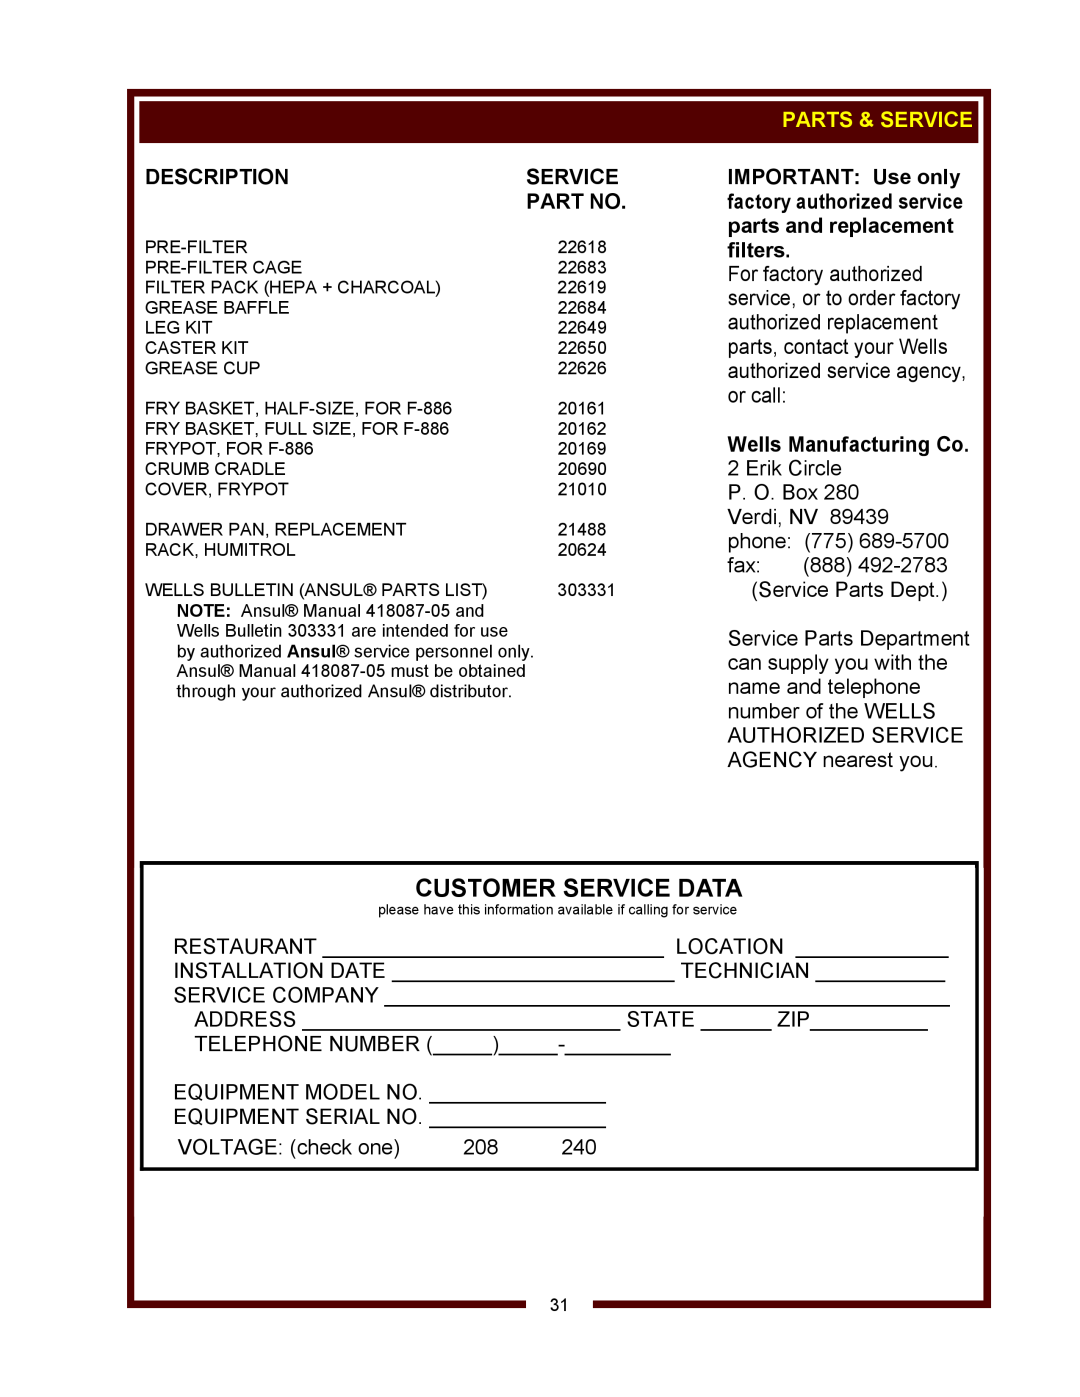 Wells WVF-886 operation manual Customer Service Data, Description, Parts & Service, Wells Manufacturing Co 